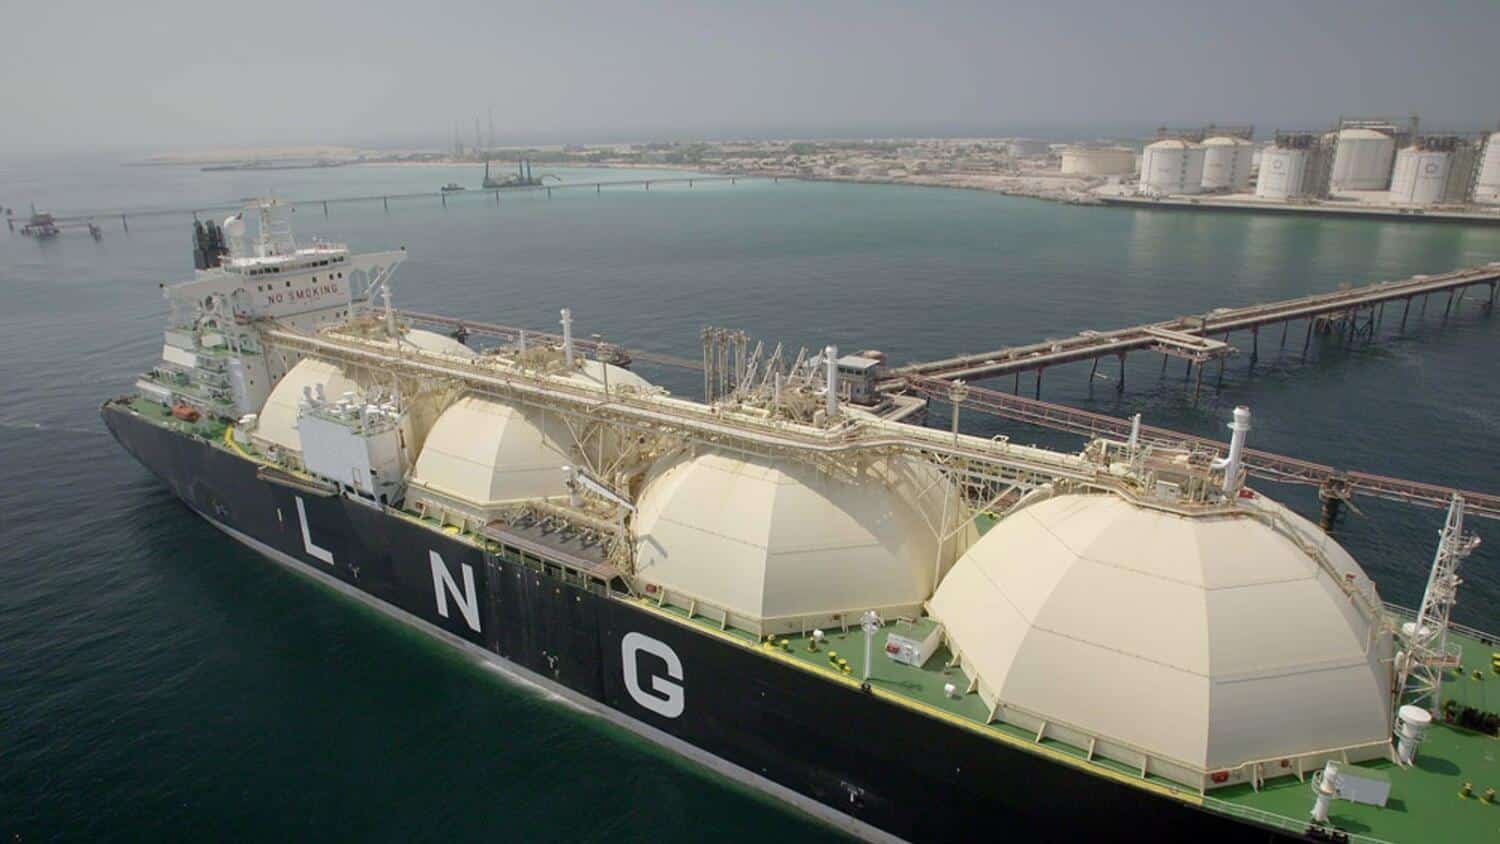 Germany Signs an LNG Agreement As the Chancellor Travels to the Gulf to Secure Energy.